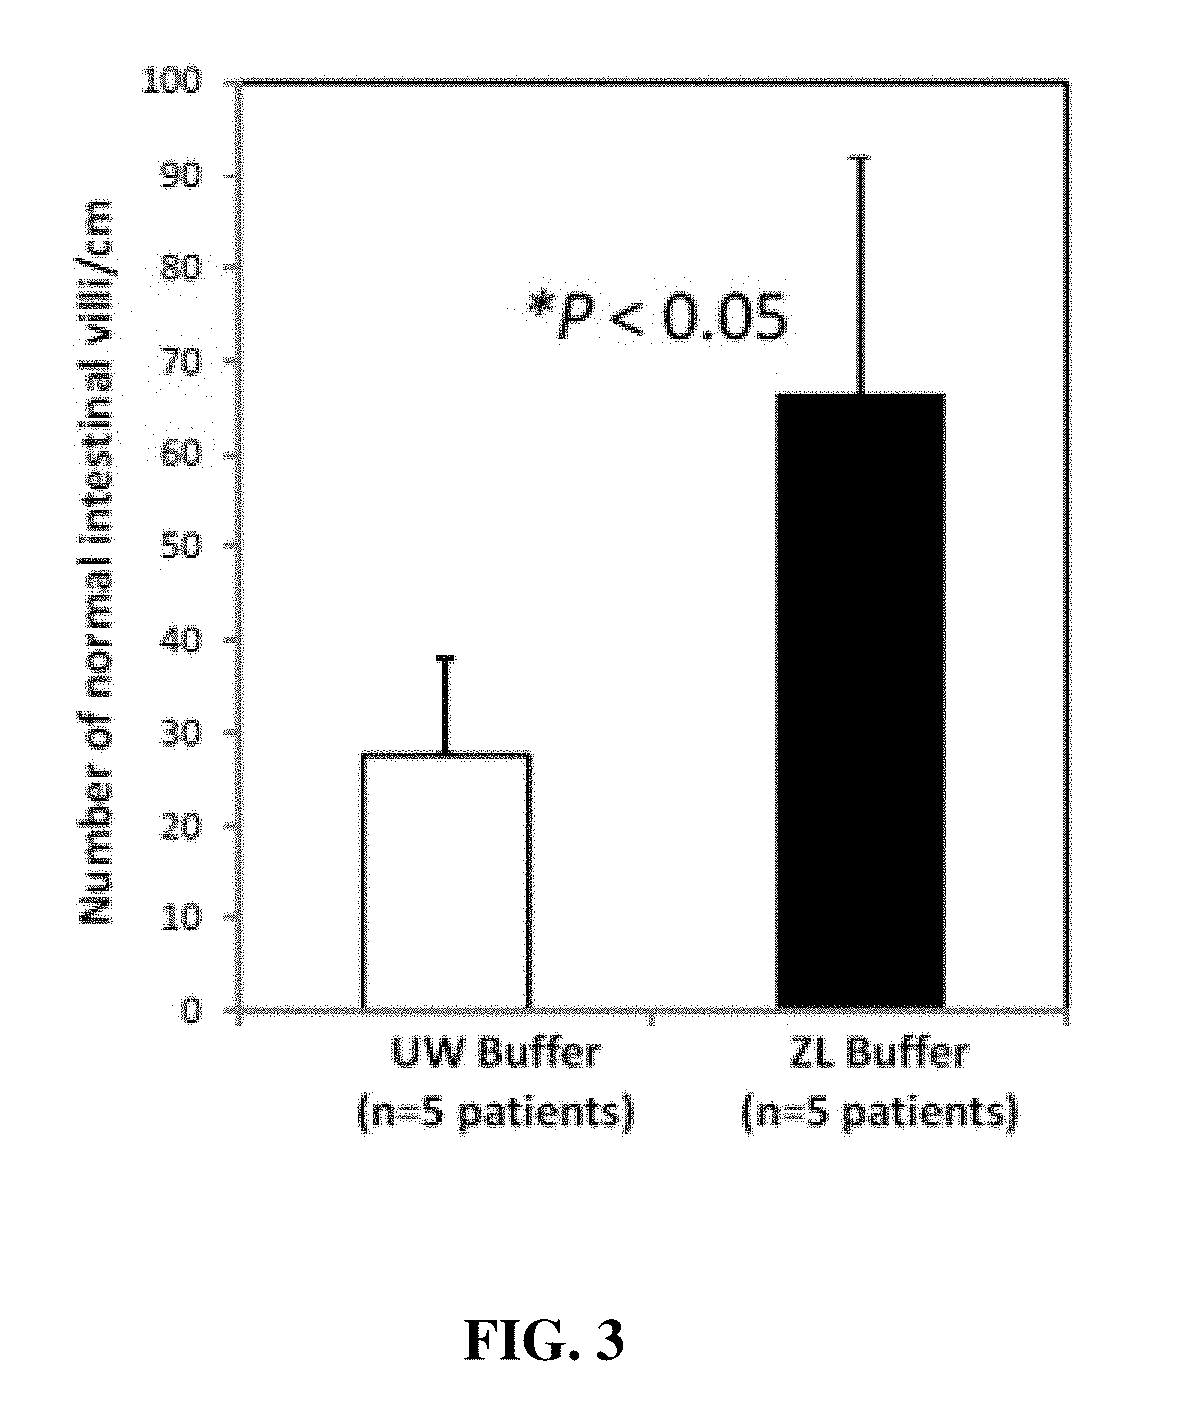 Organ preservation solution and methods of use thereof in the inhibition of ischemia-reperfusion injury